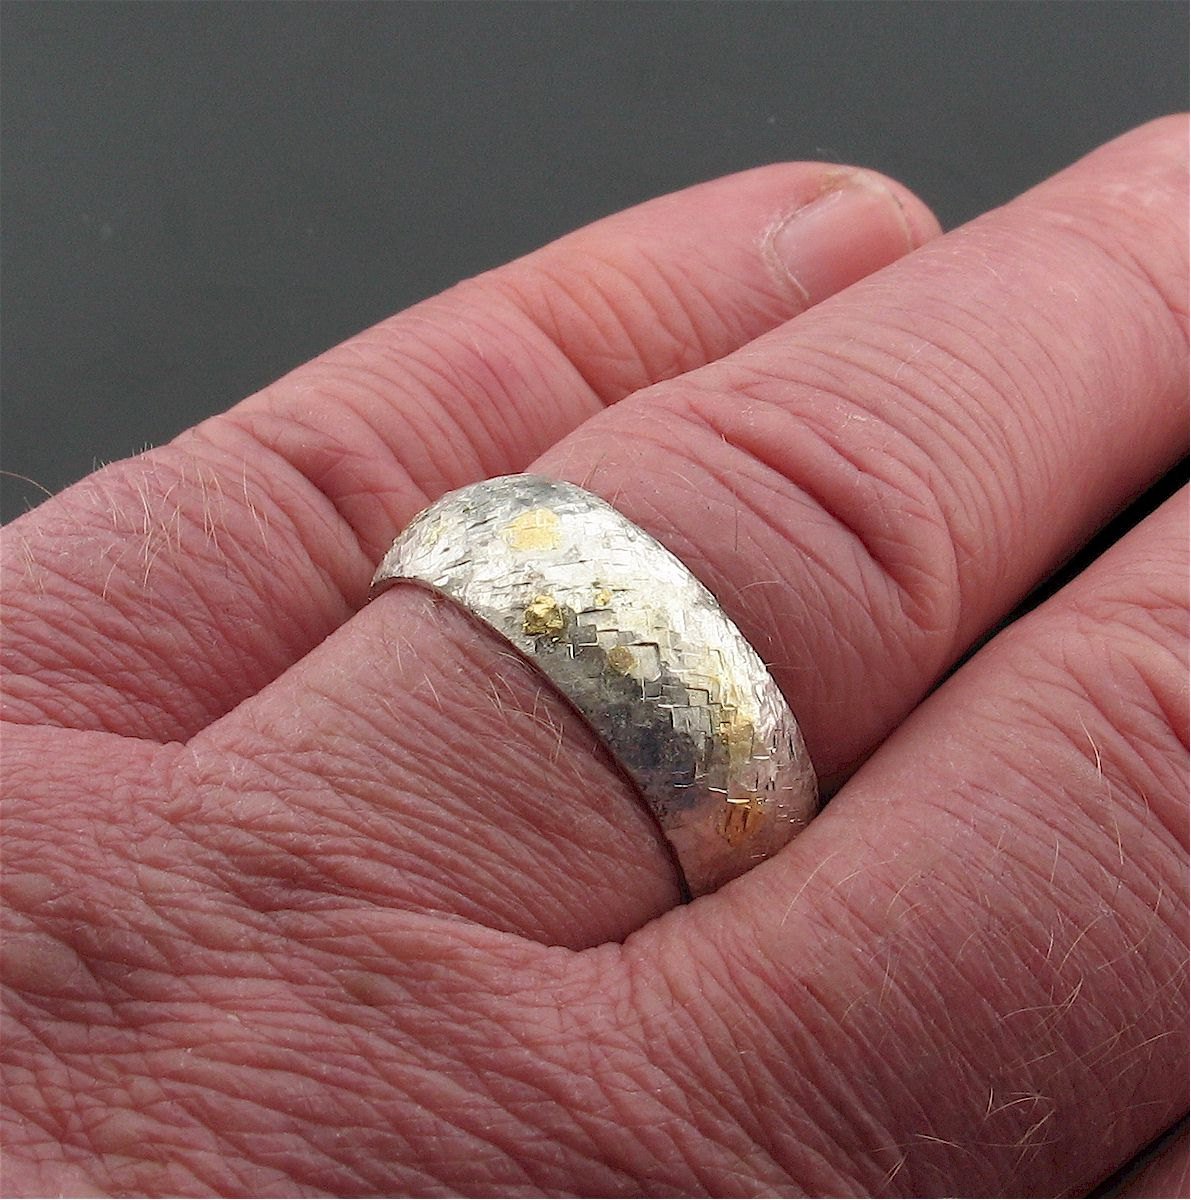 Silver and gold Morning View 8mm court wedding ring with rustic hammered surface. Original design handmade band for a man - Cumbrian Designs